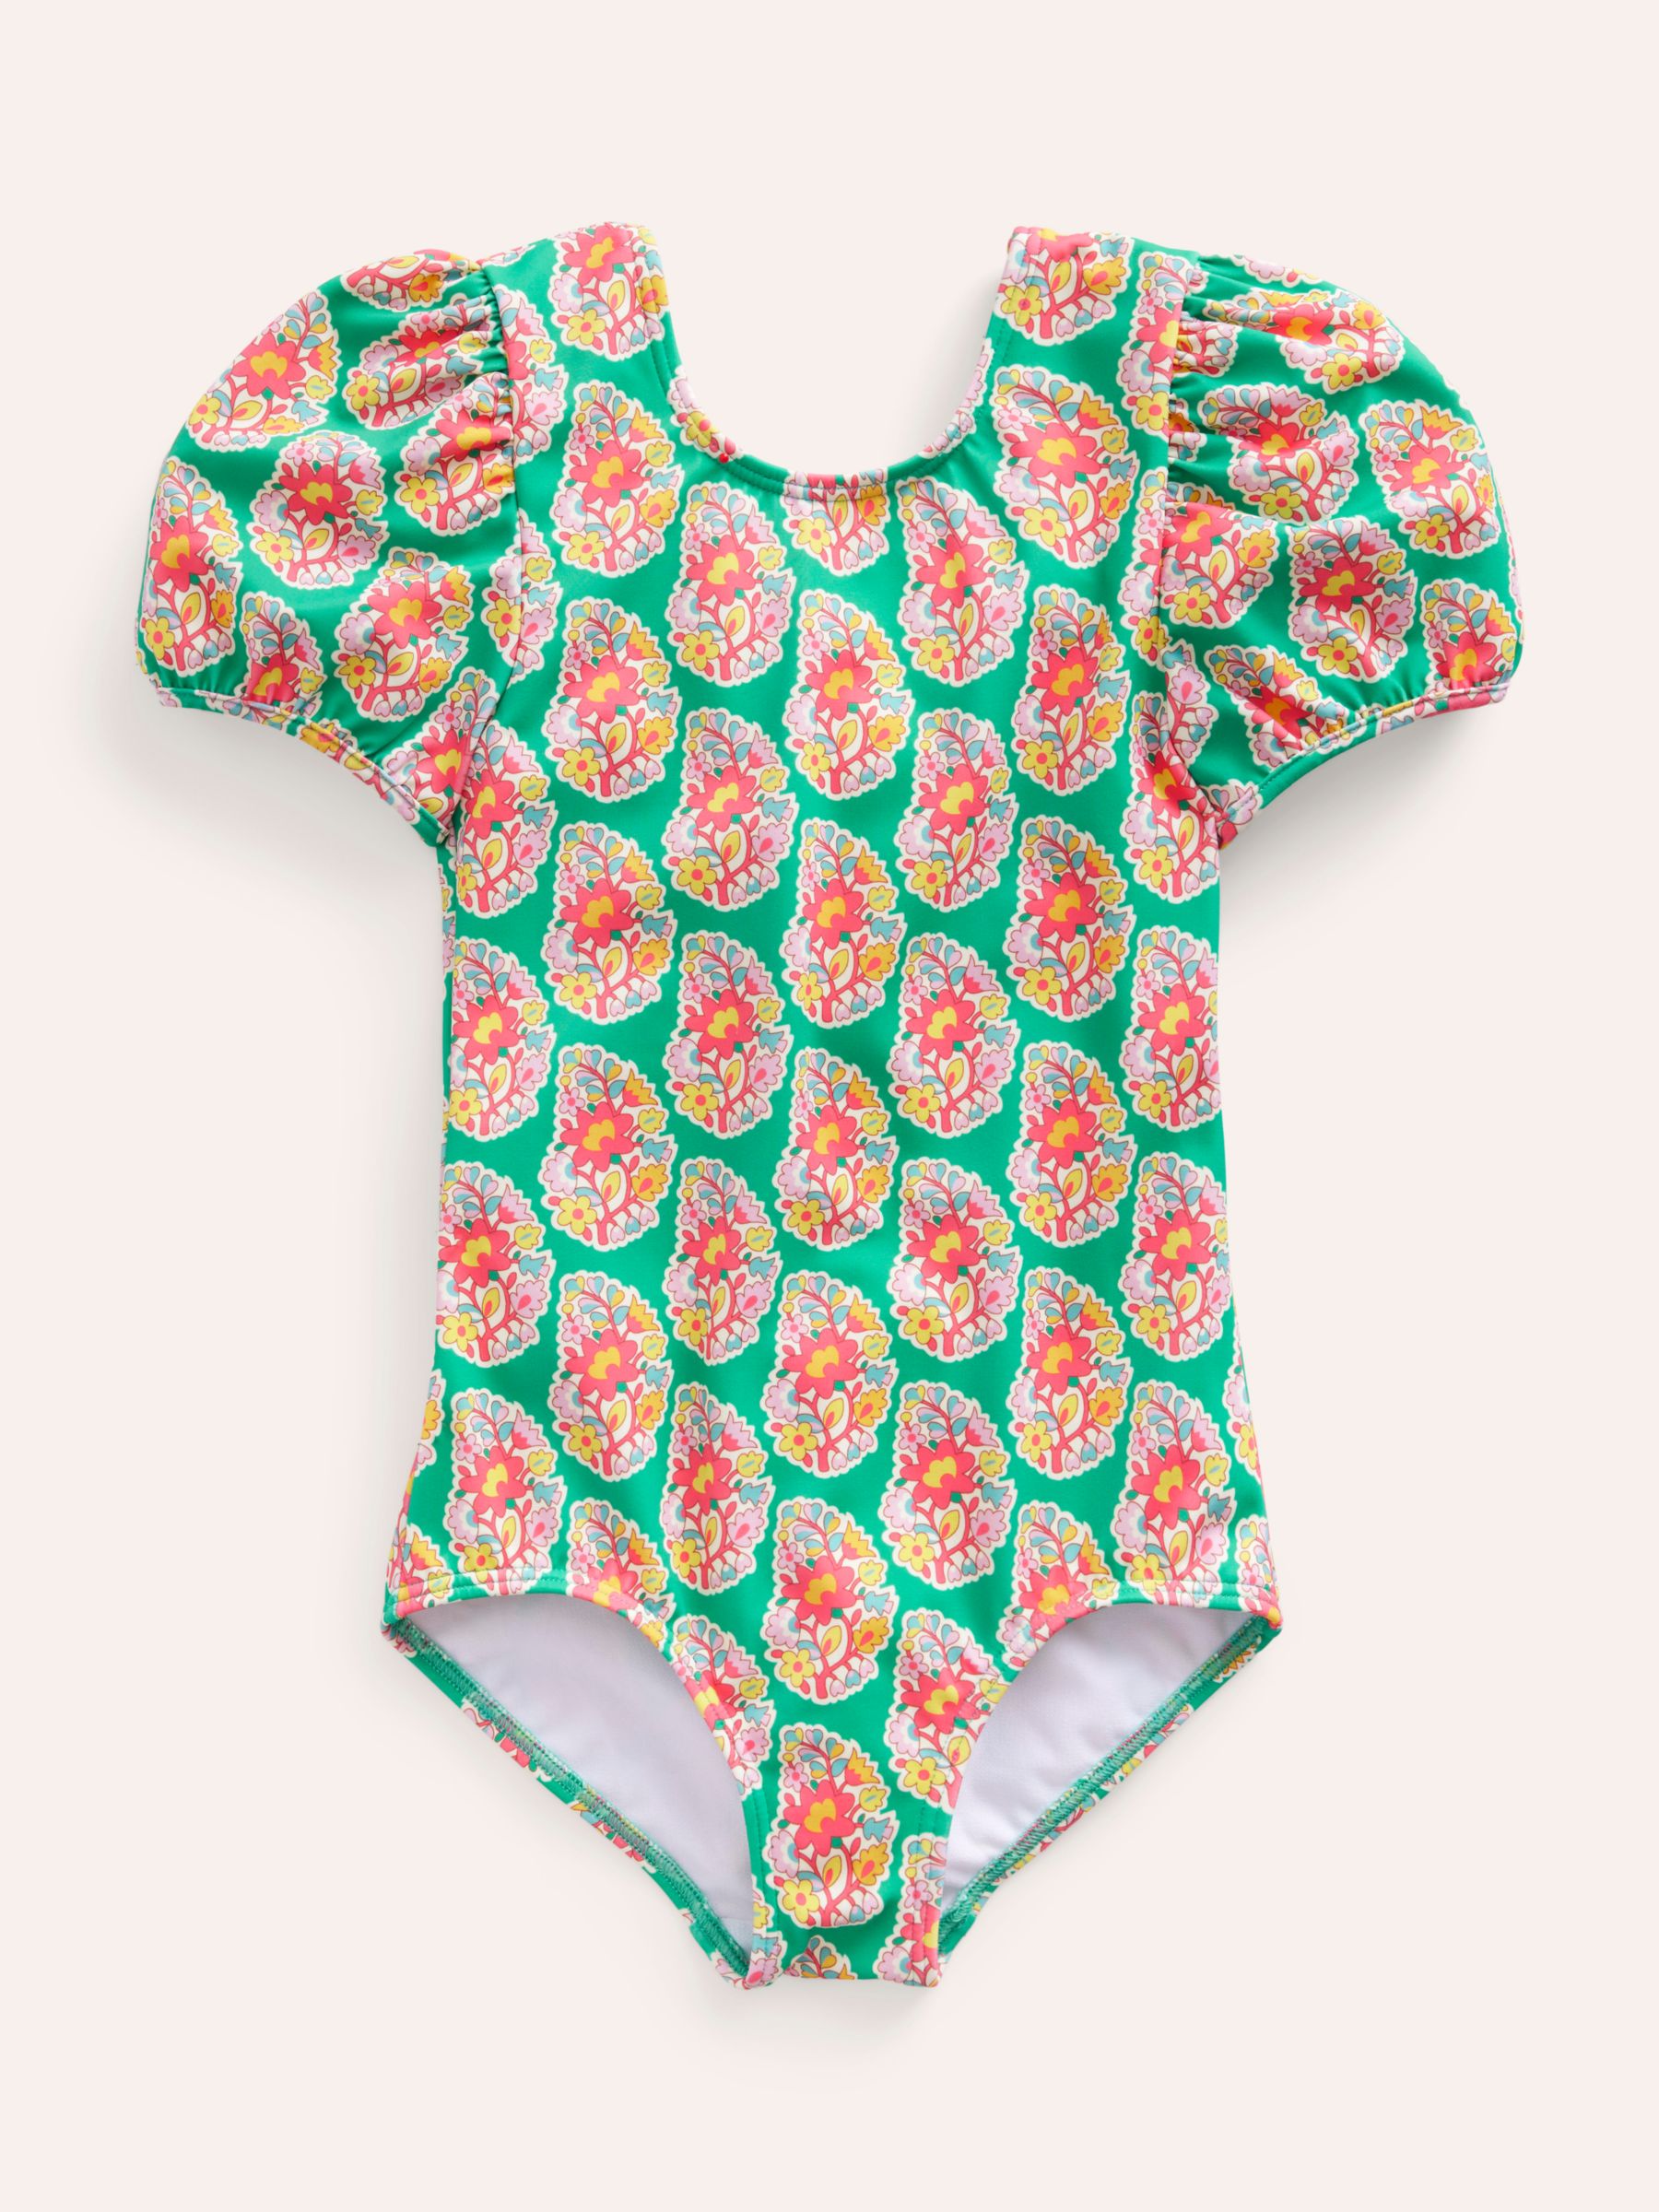 Mini Boden Kids' Floral Print Puff Sleeve Swimsuit, Jade Green Paisley, 11-12Y